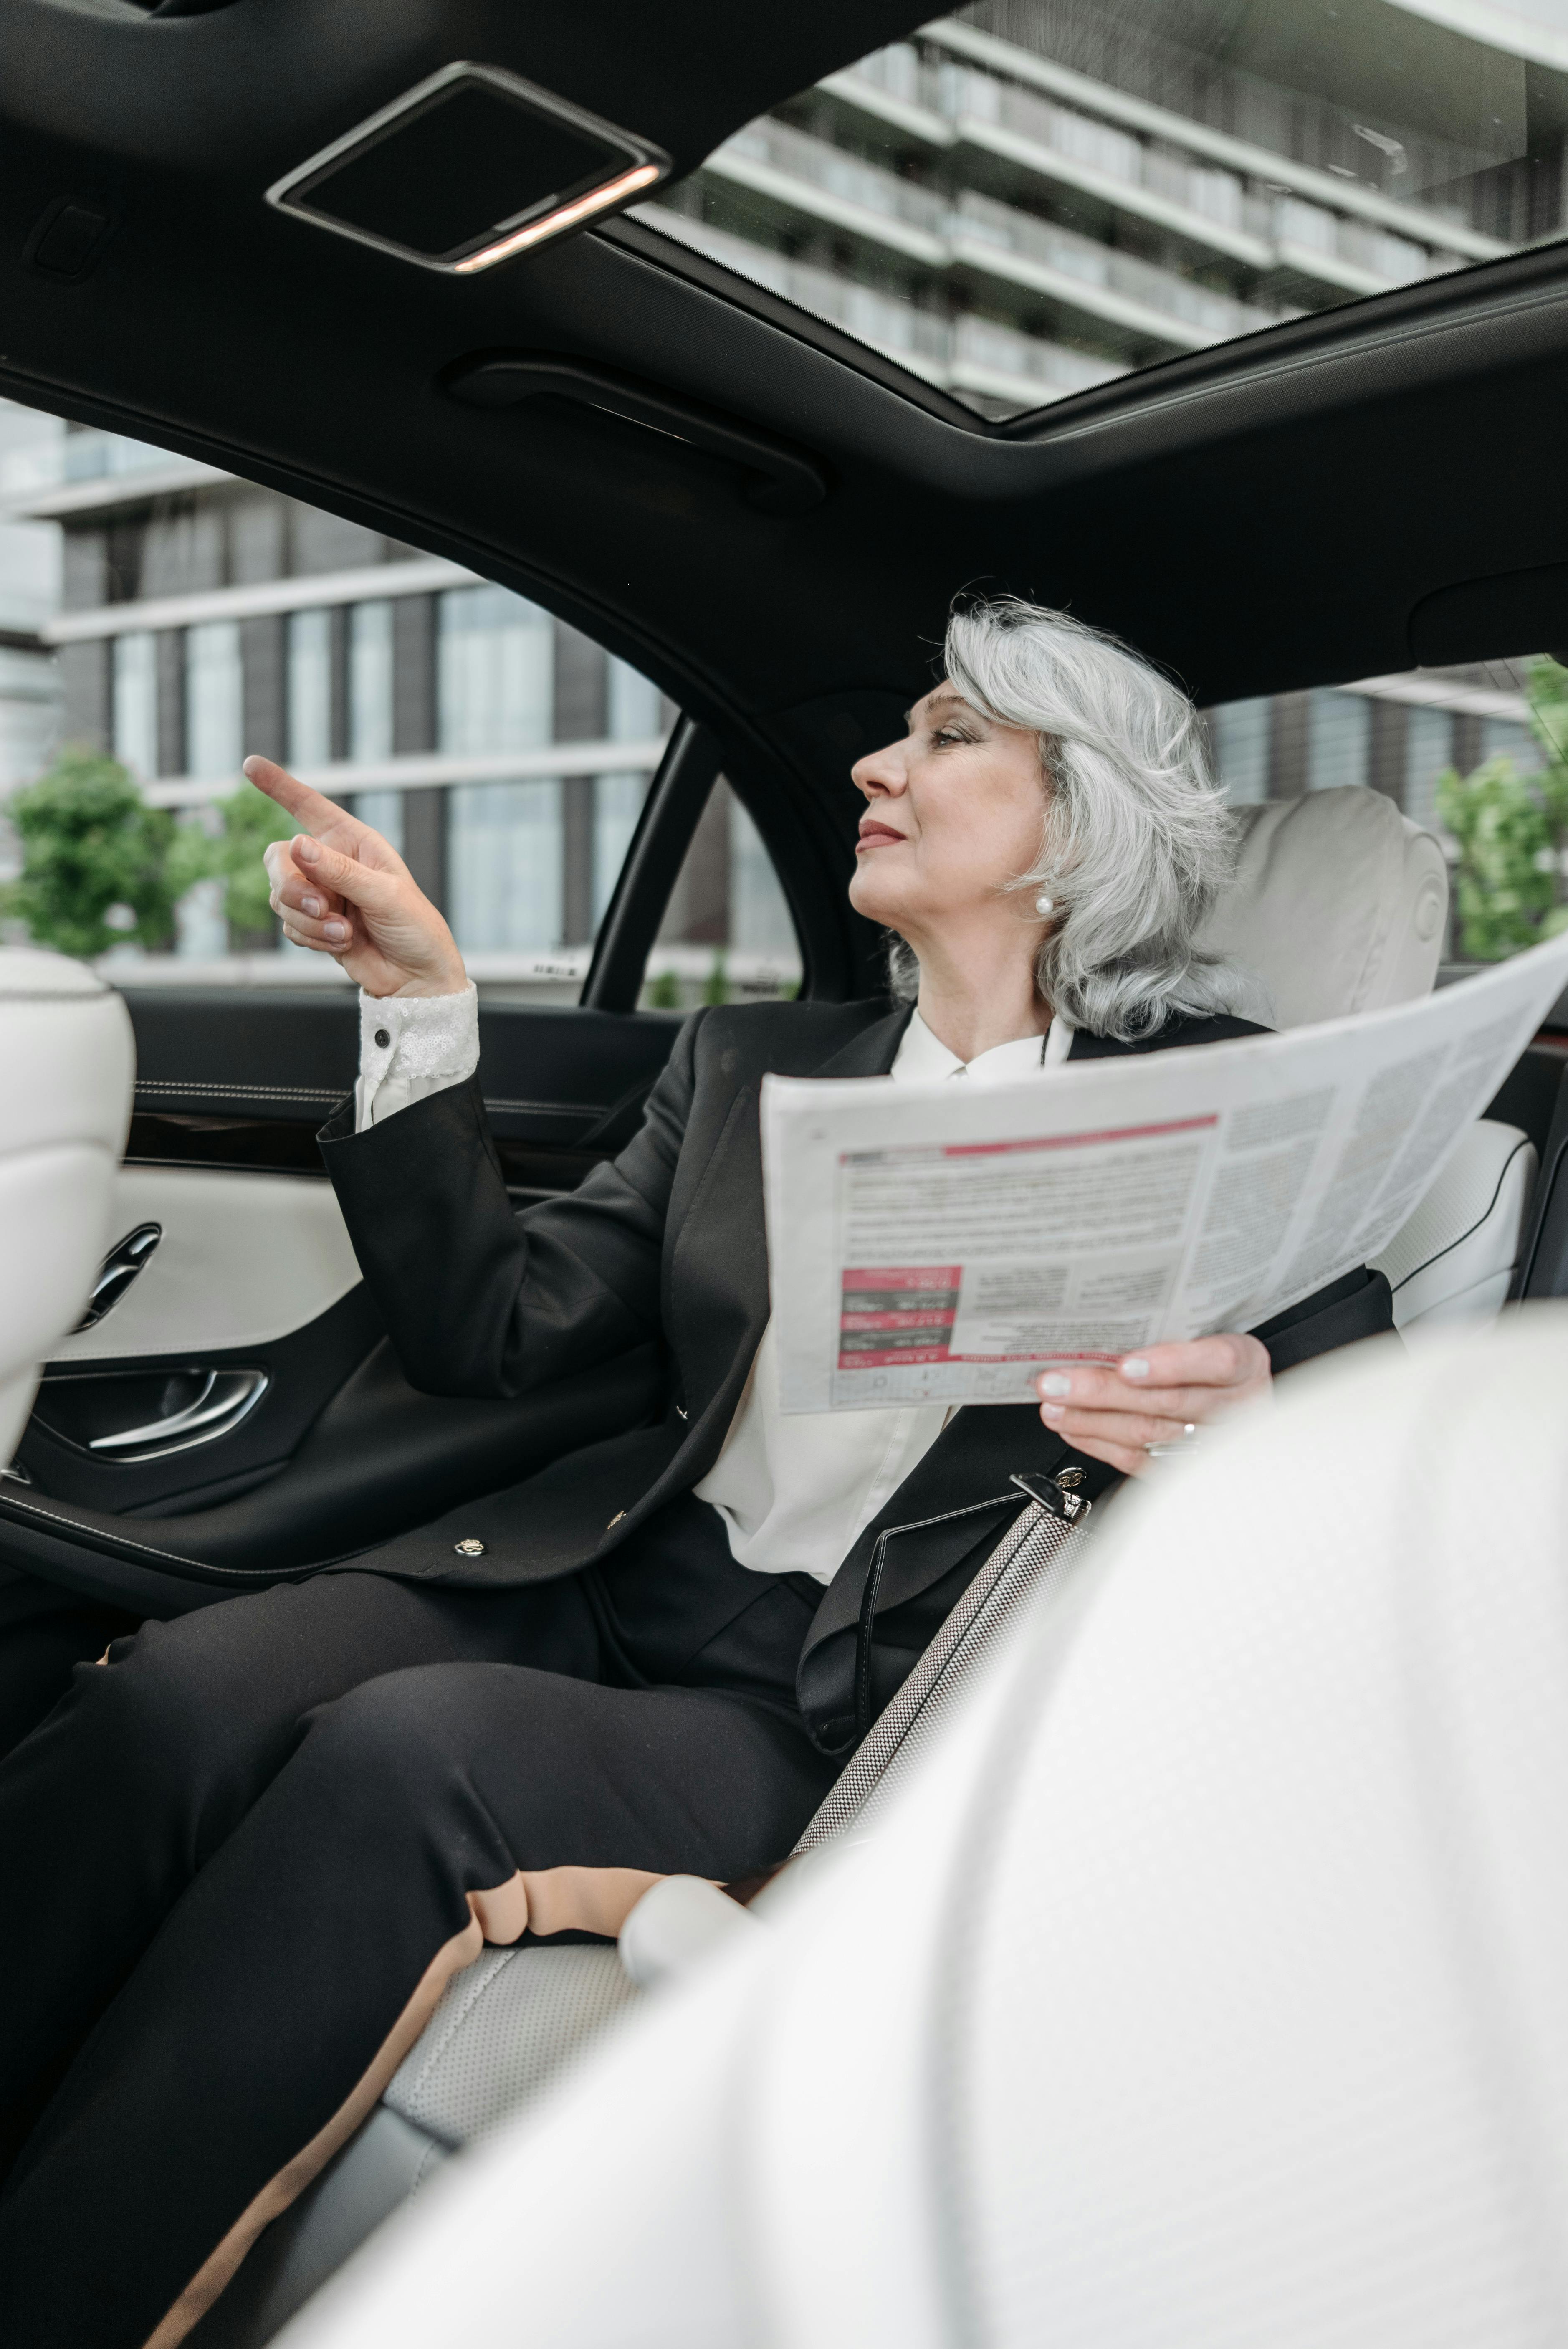 The elderly woman talking to her family in the car | Source: Pexels